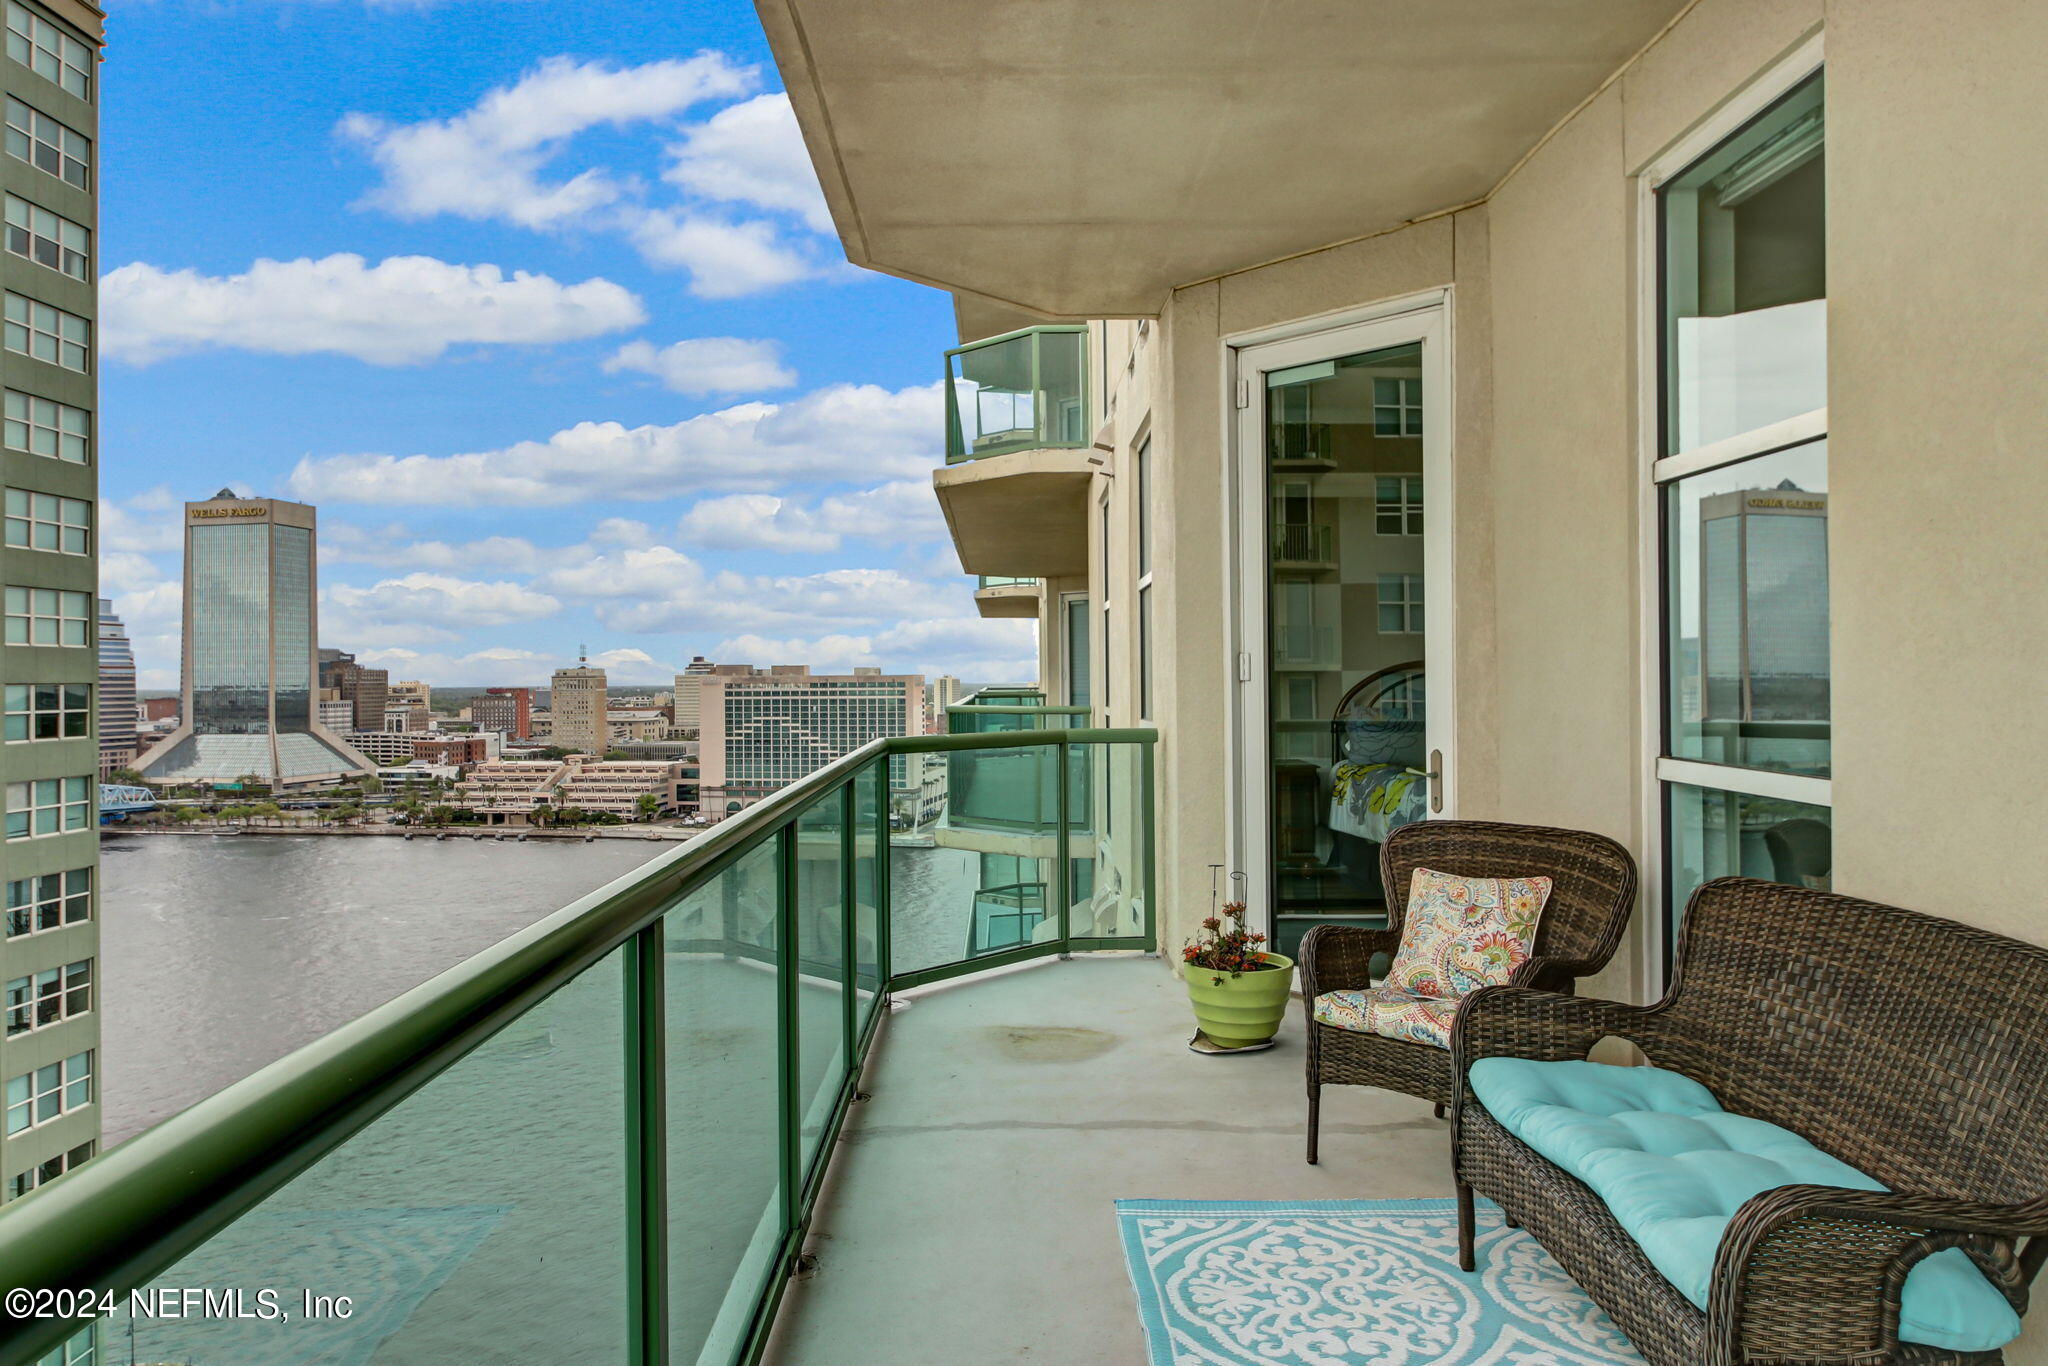 a balcony with furniture and a lake view